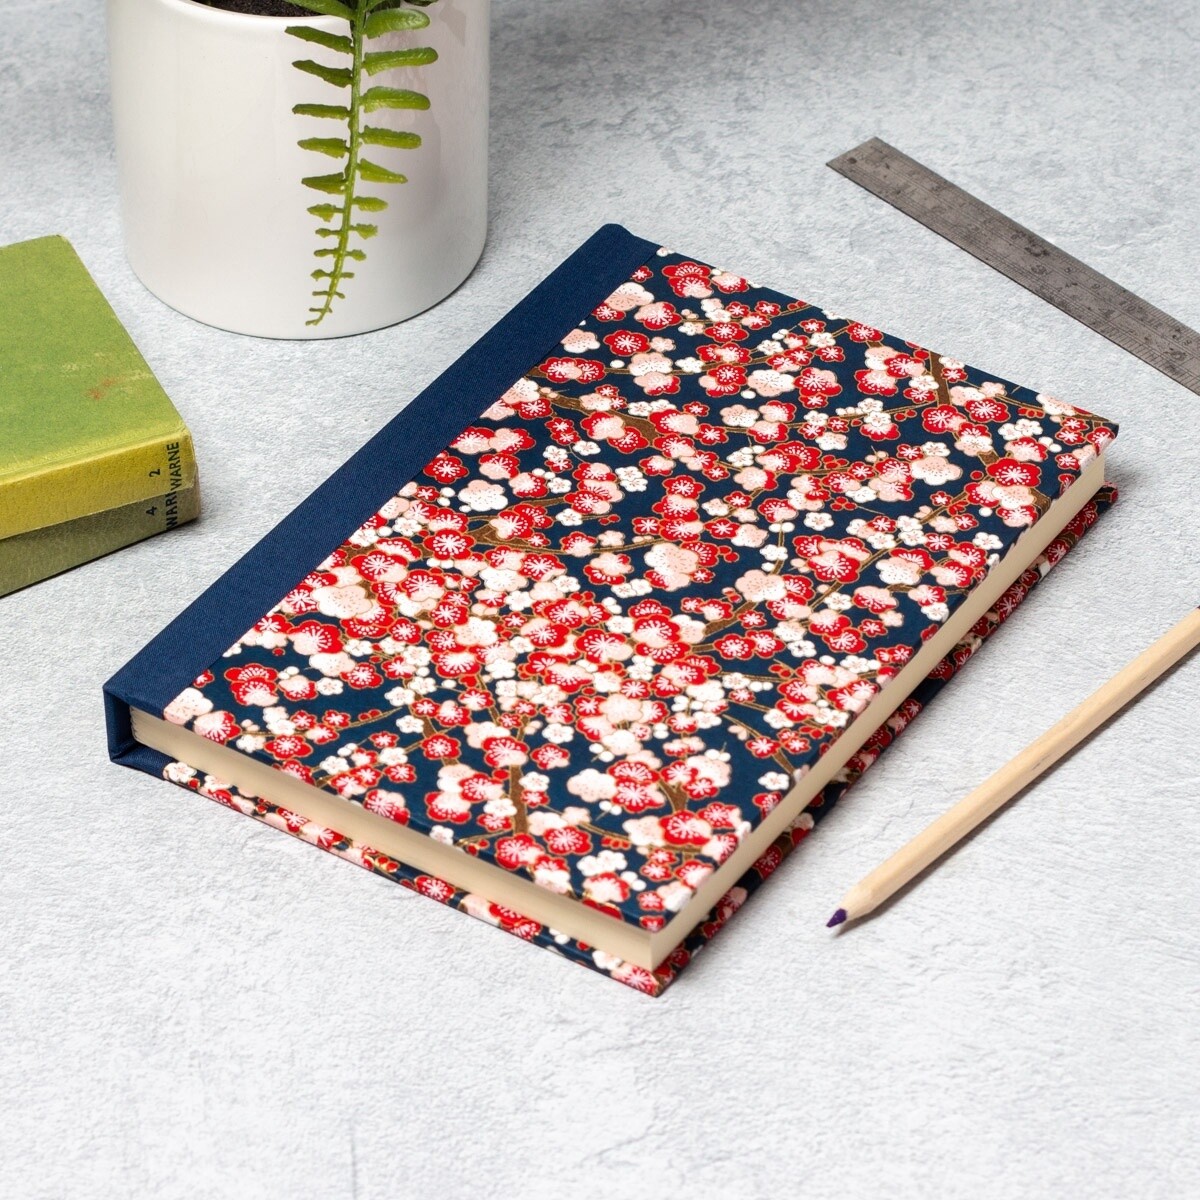 Classic Journal - A5 - Pink Blossom/Dark Blue by Esmie